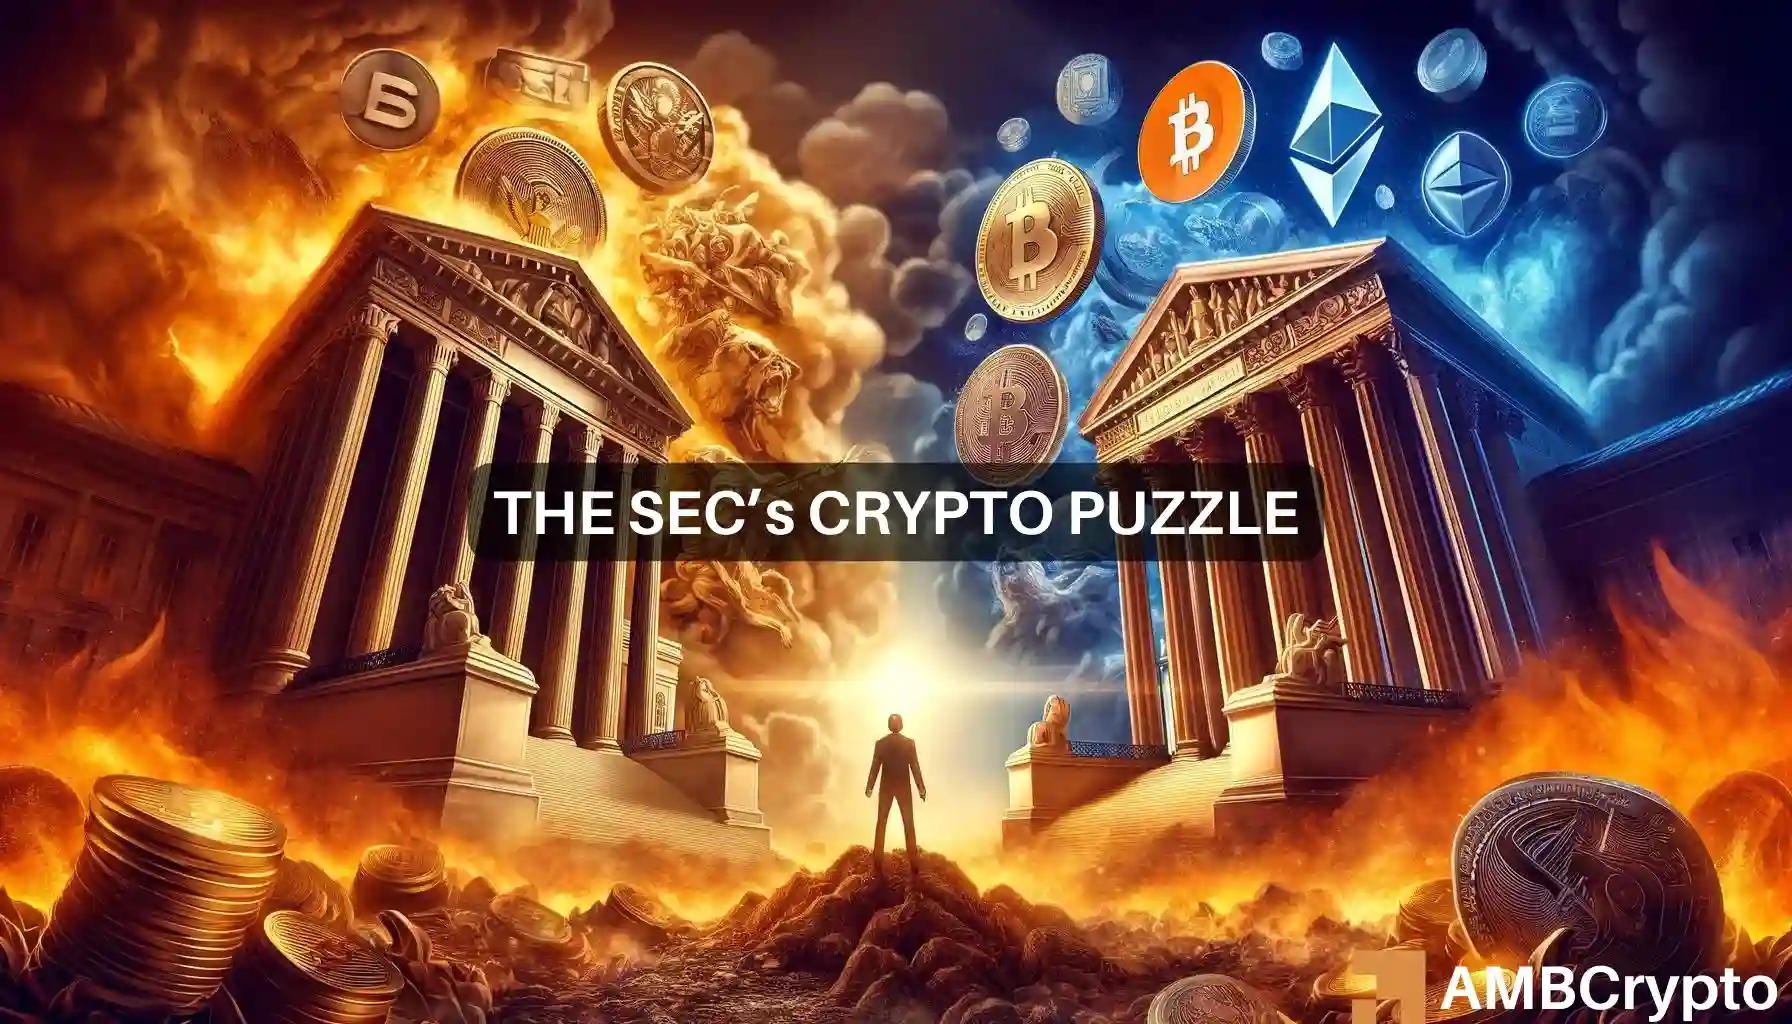 The increasing scrutiny from the SEC against crypto